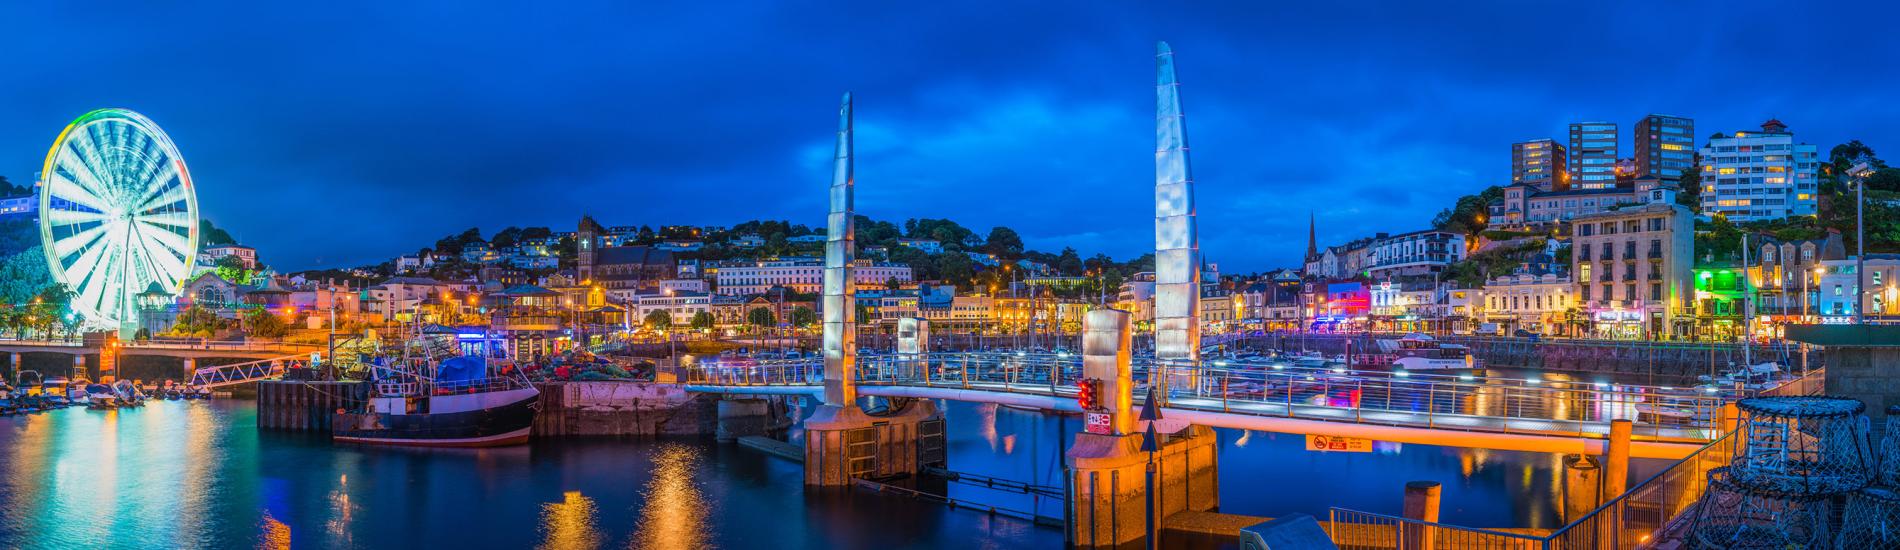 Torquay harbour at night with lights